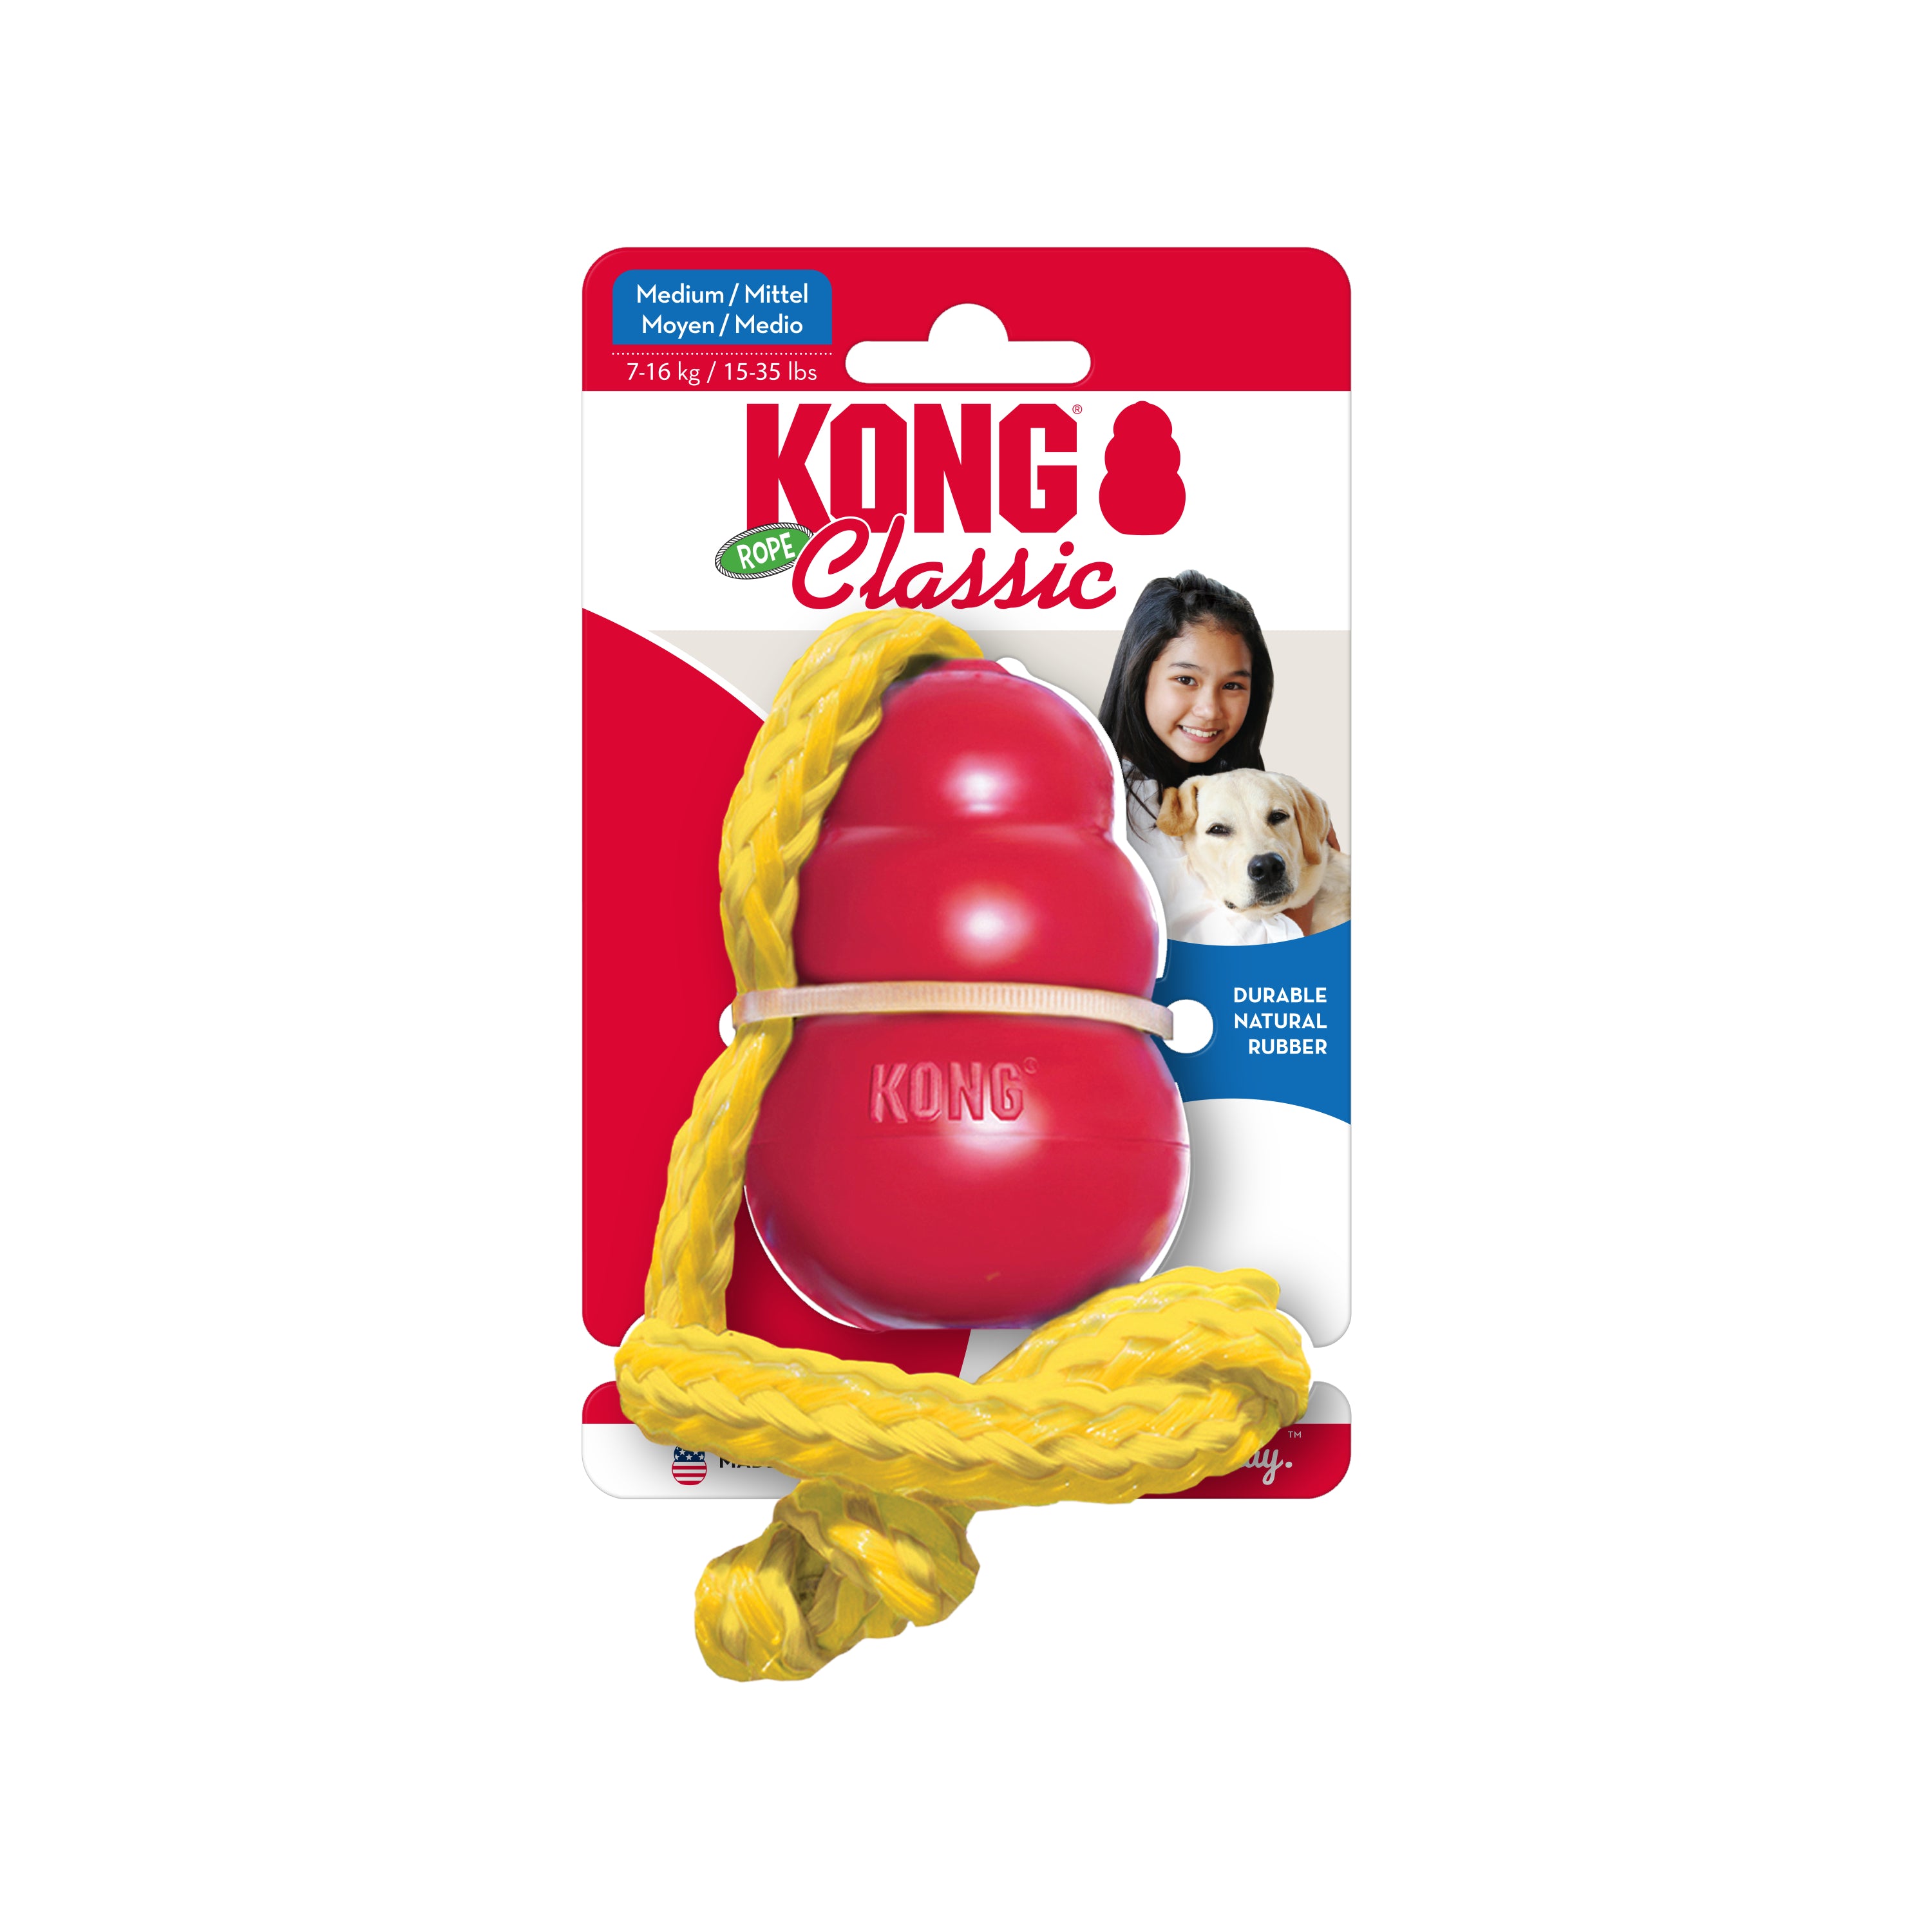 KONG Classic with Rope